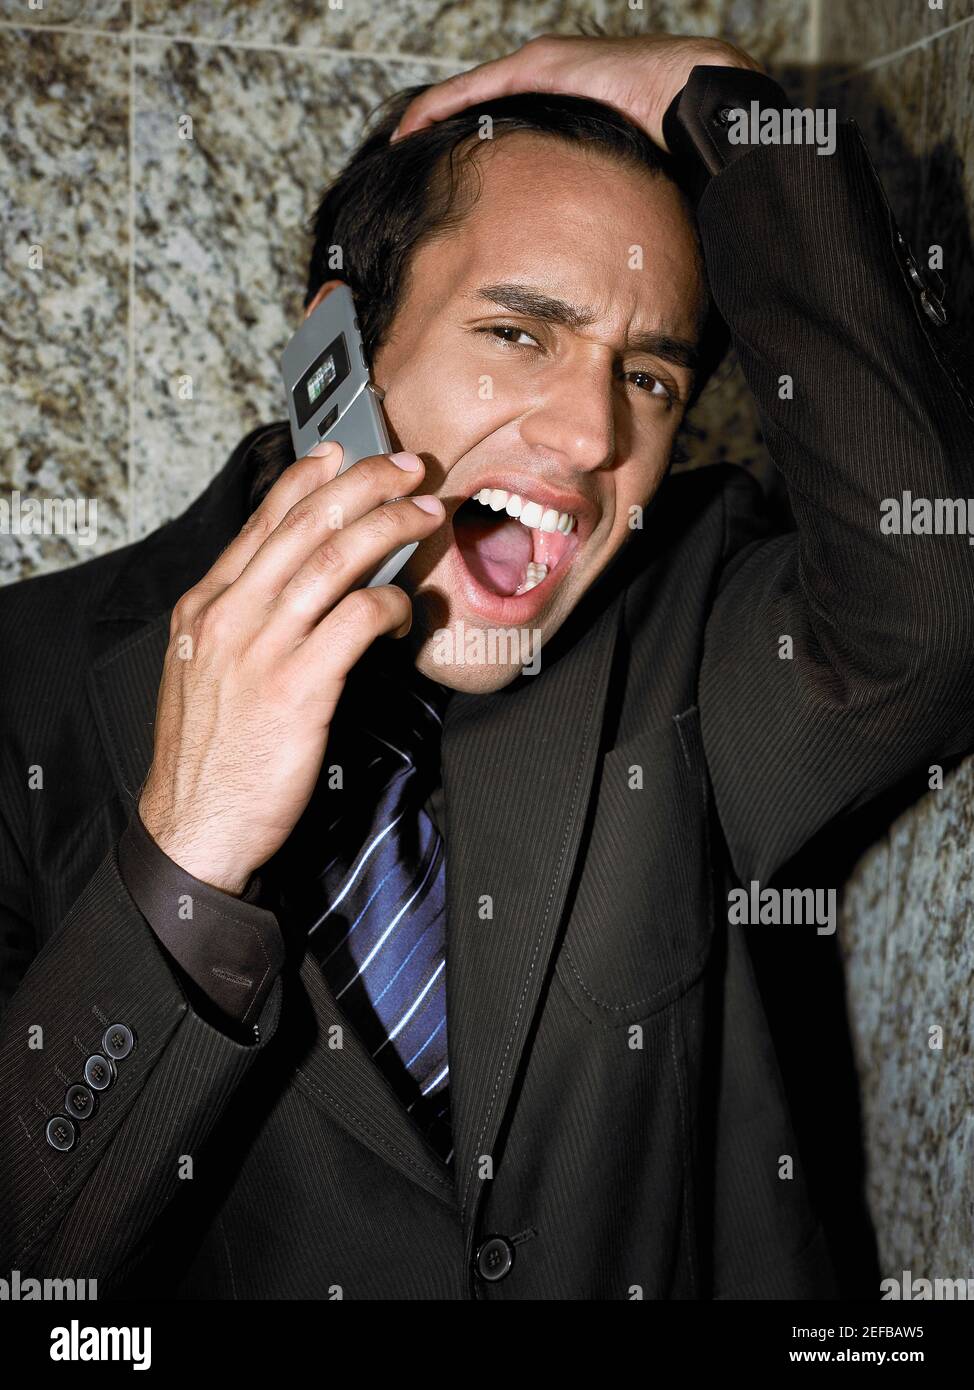 Portrait of a young businessman shouting into a mobile phone Stock Photo